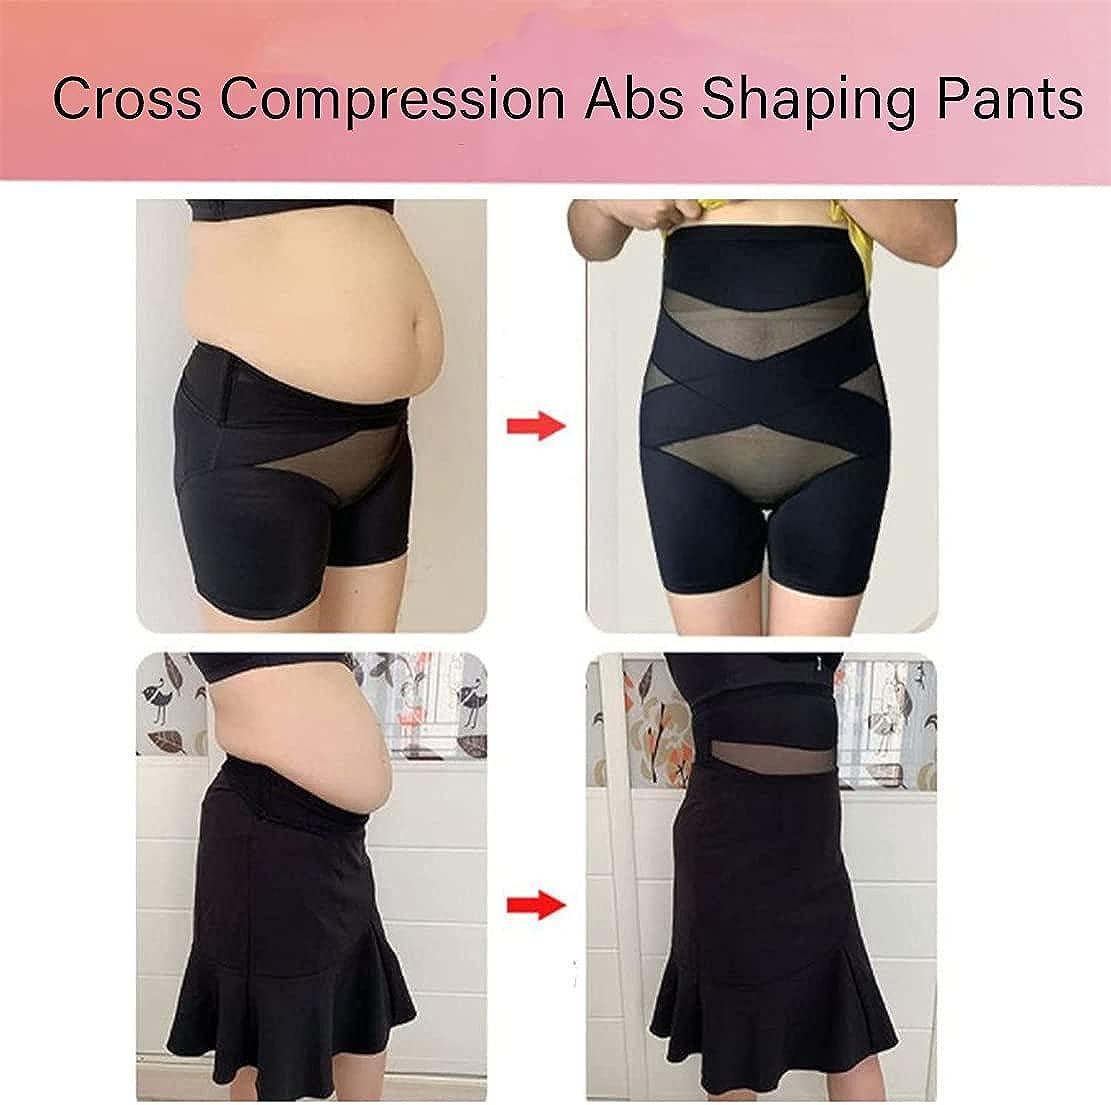 Cross Compression Abs Shaping Pants Cross Compression Abs Shaping Pants